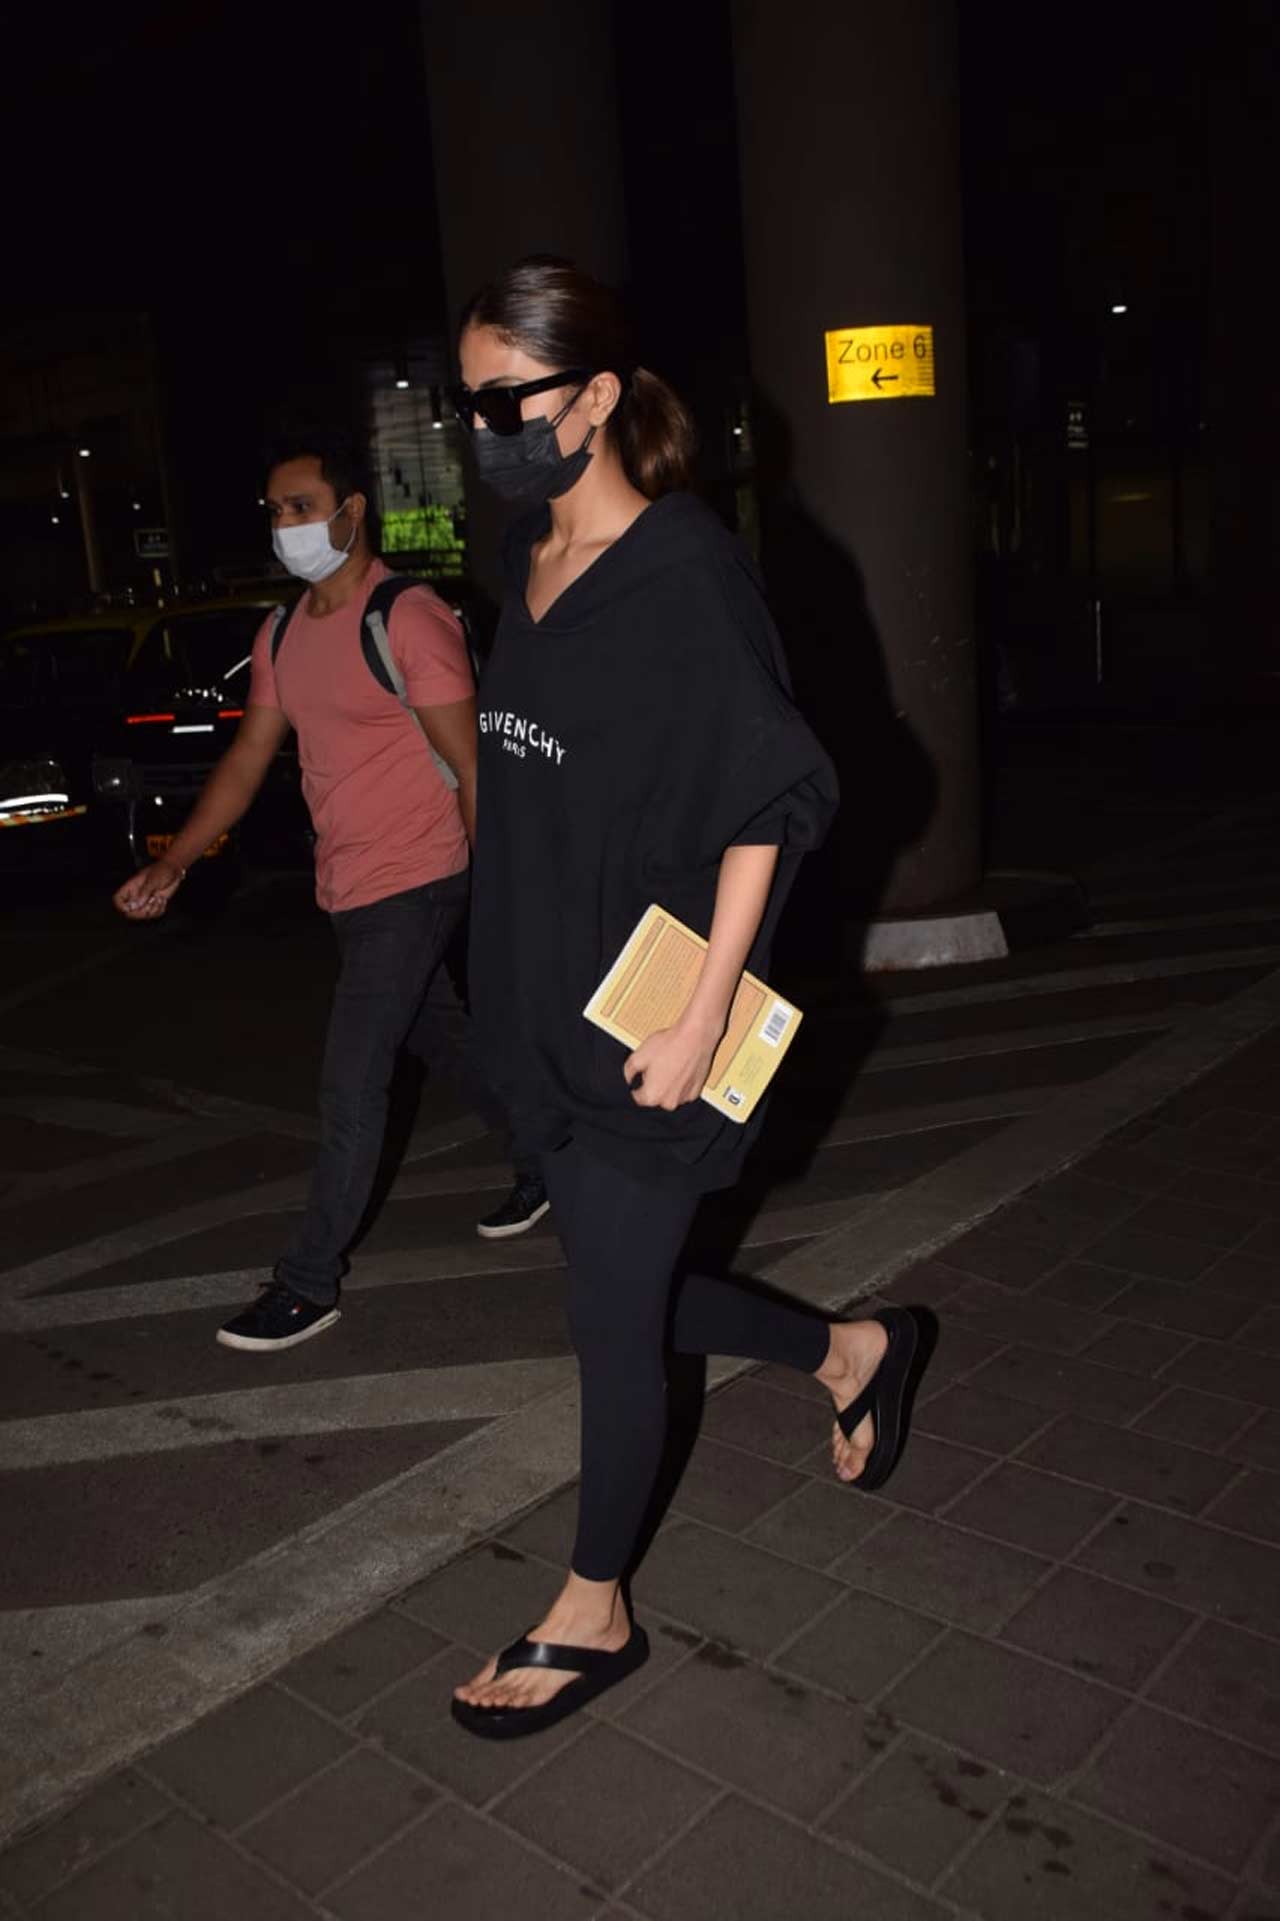 Vaani Kapoor, who was last seen in Akshay Kumar's BellBottom, sported an all-black outfit as her airport look. The actress, on the work front, will be next seen in 'Shamshera' also starring Ranbir Kapoor and Sanjay Dutt.